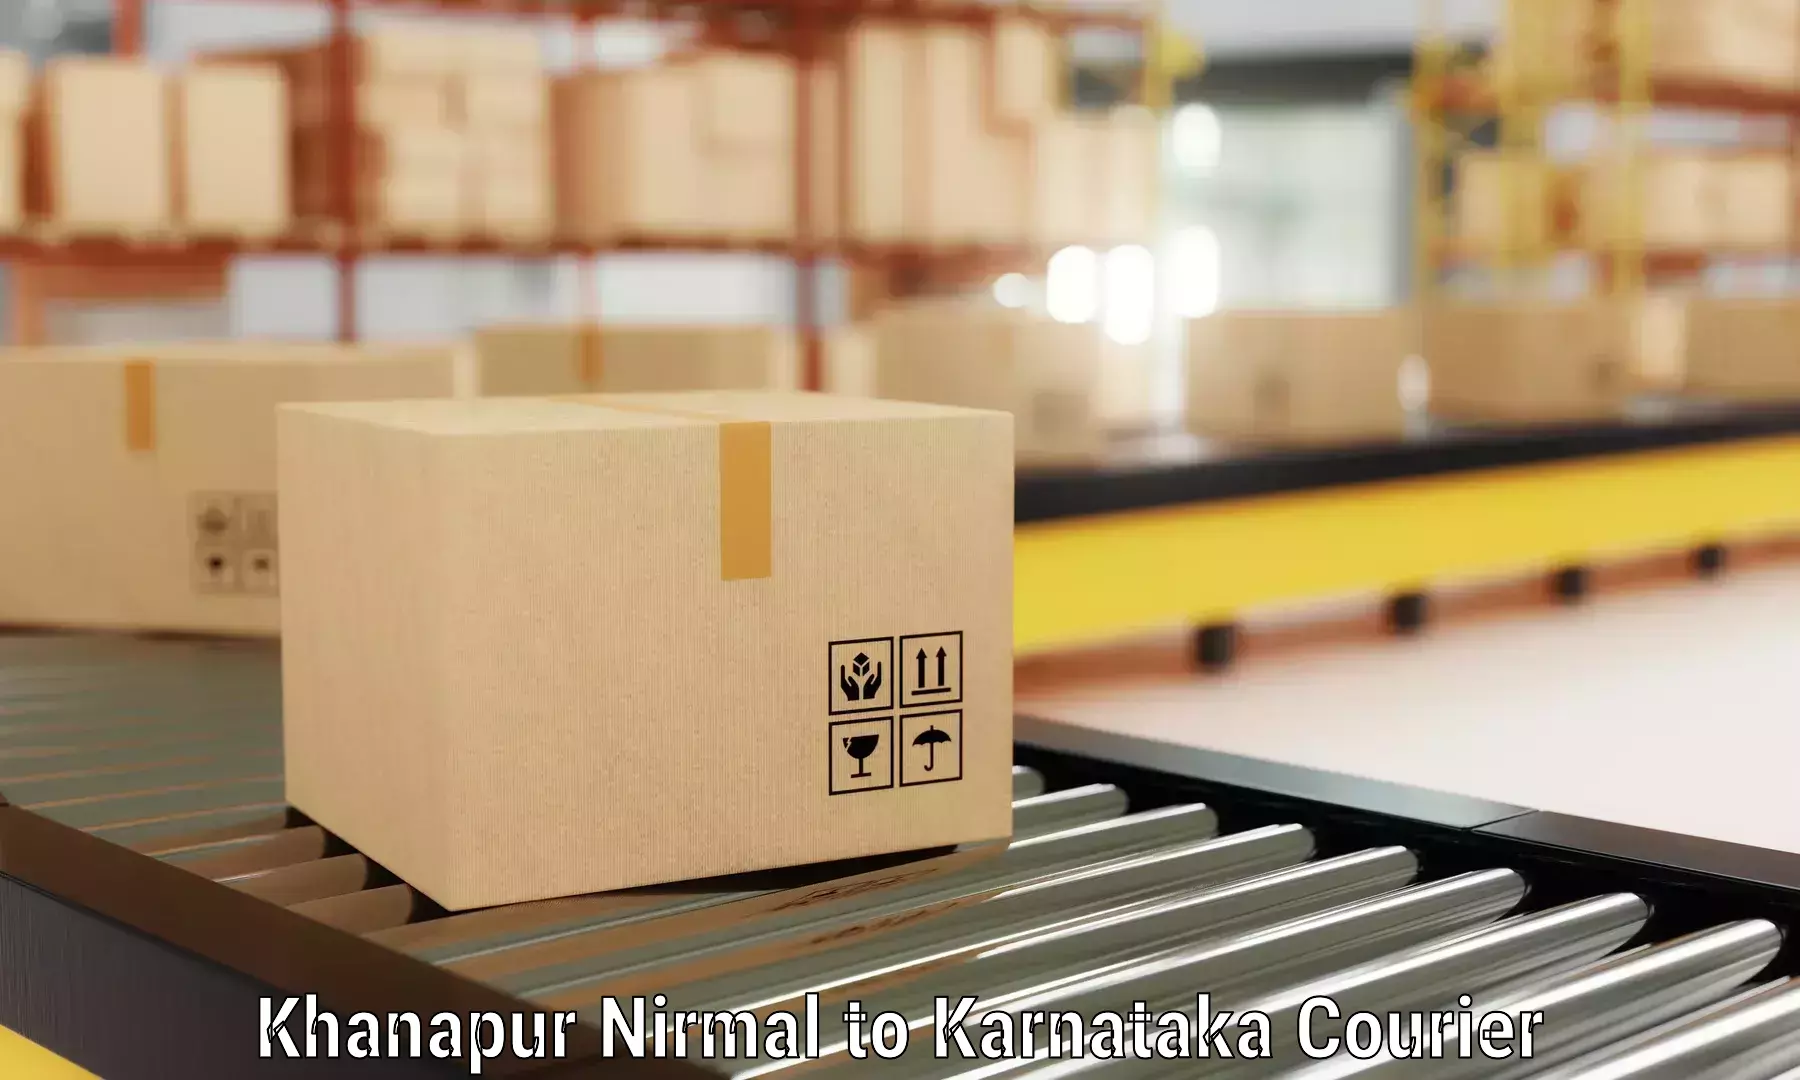 Trusted moving company in Khanapur Nirmal to Pavagada